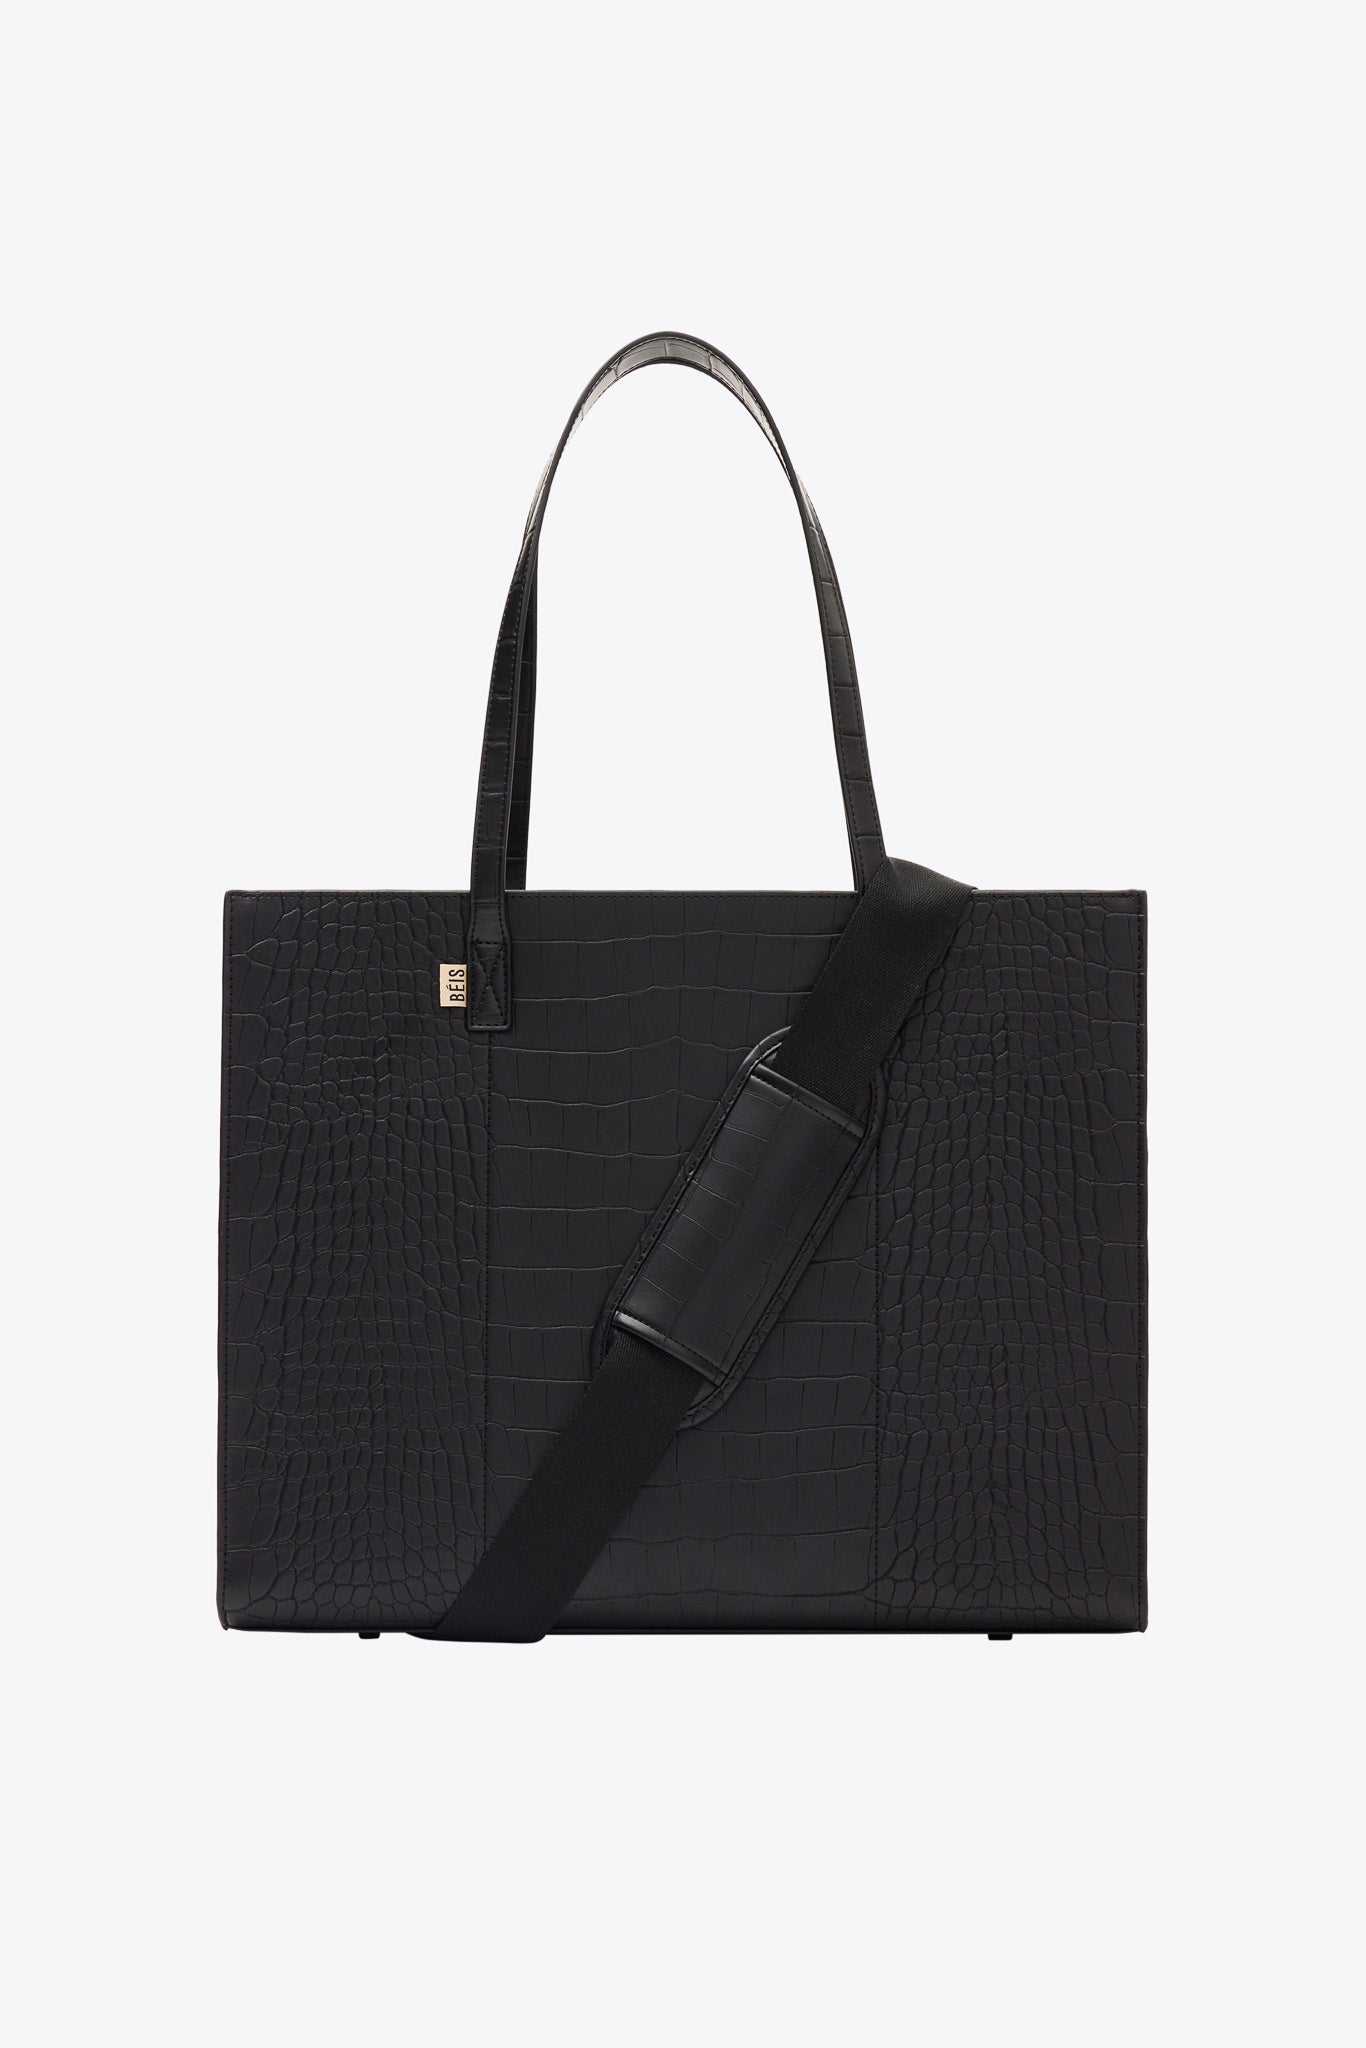 25 Best Tote Bags for Work, Travel, Beach Days & Beyond | Glamour